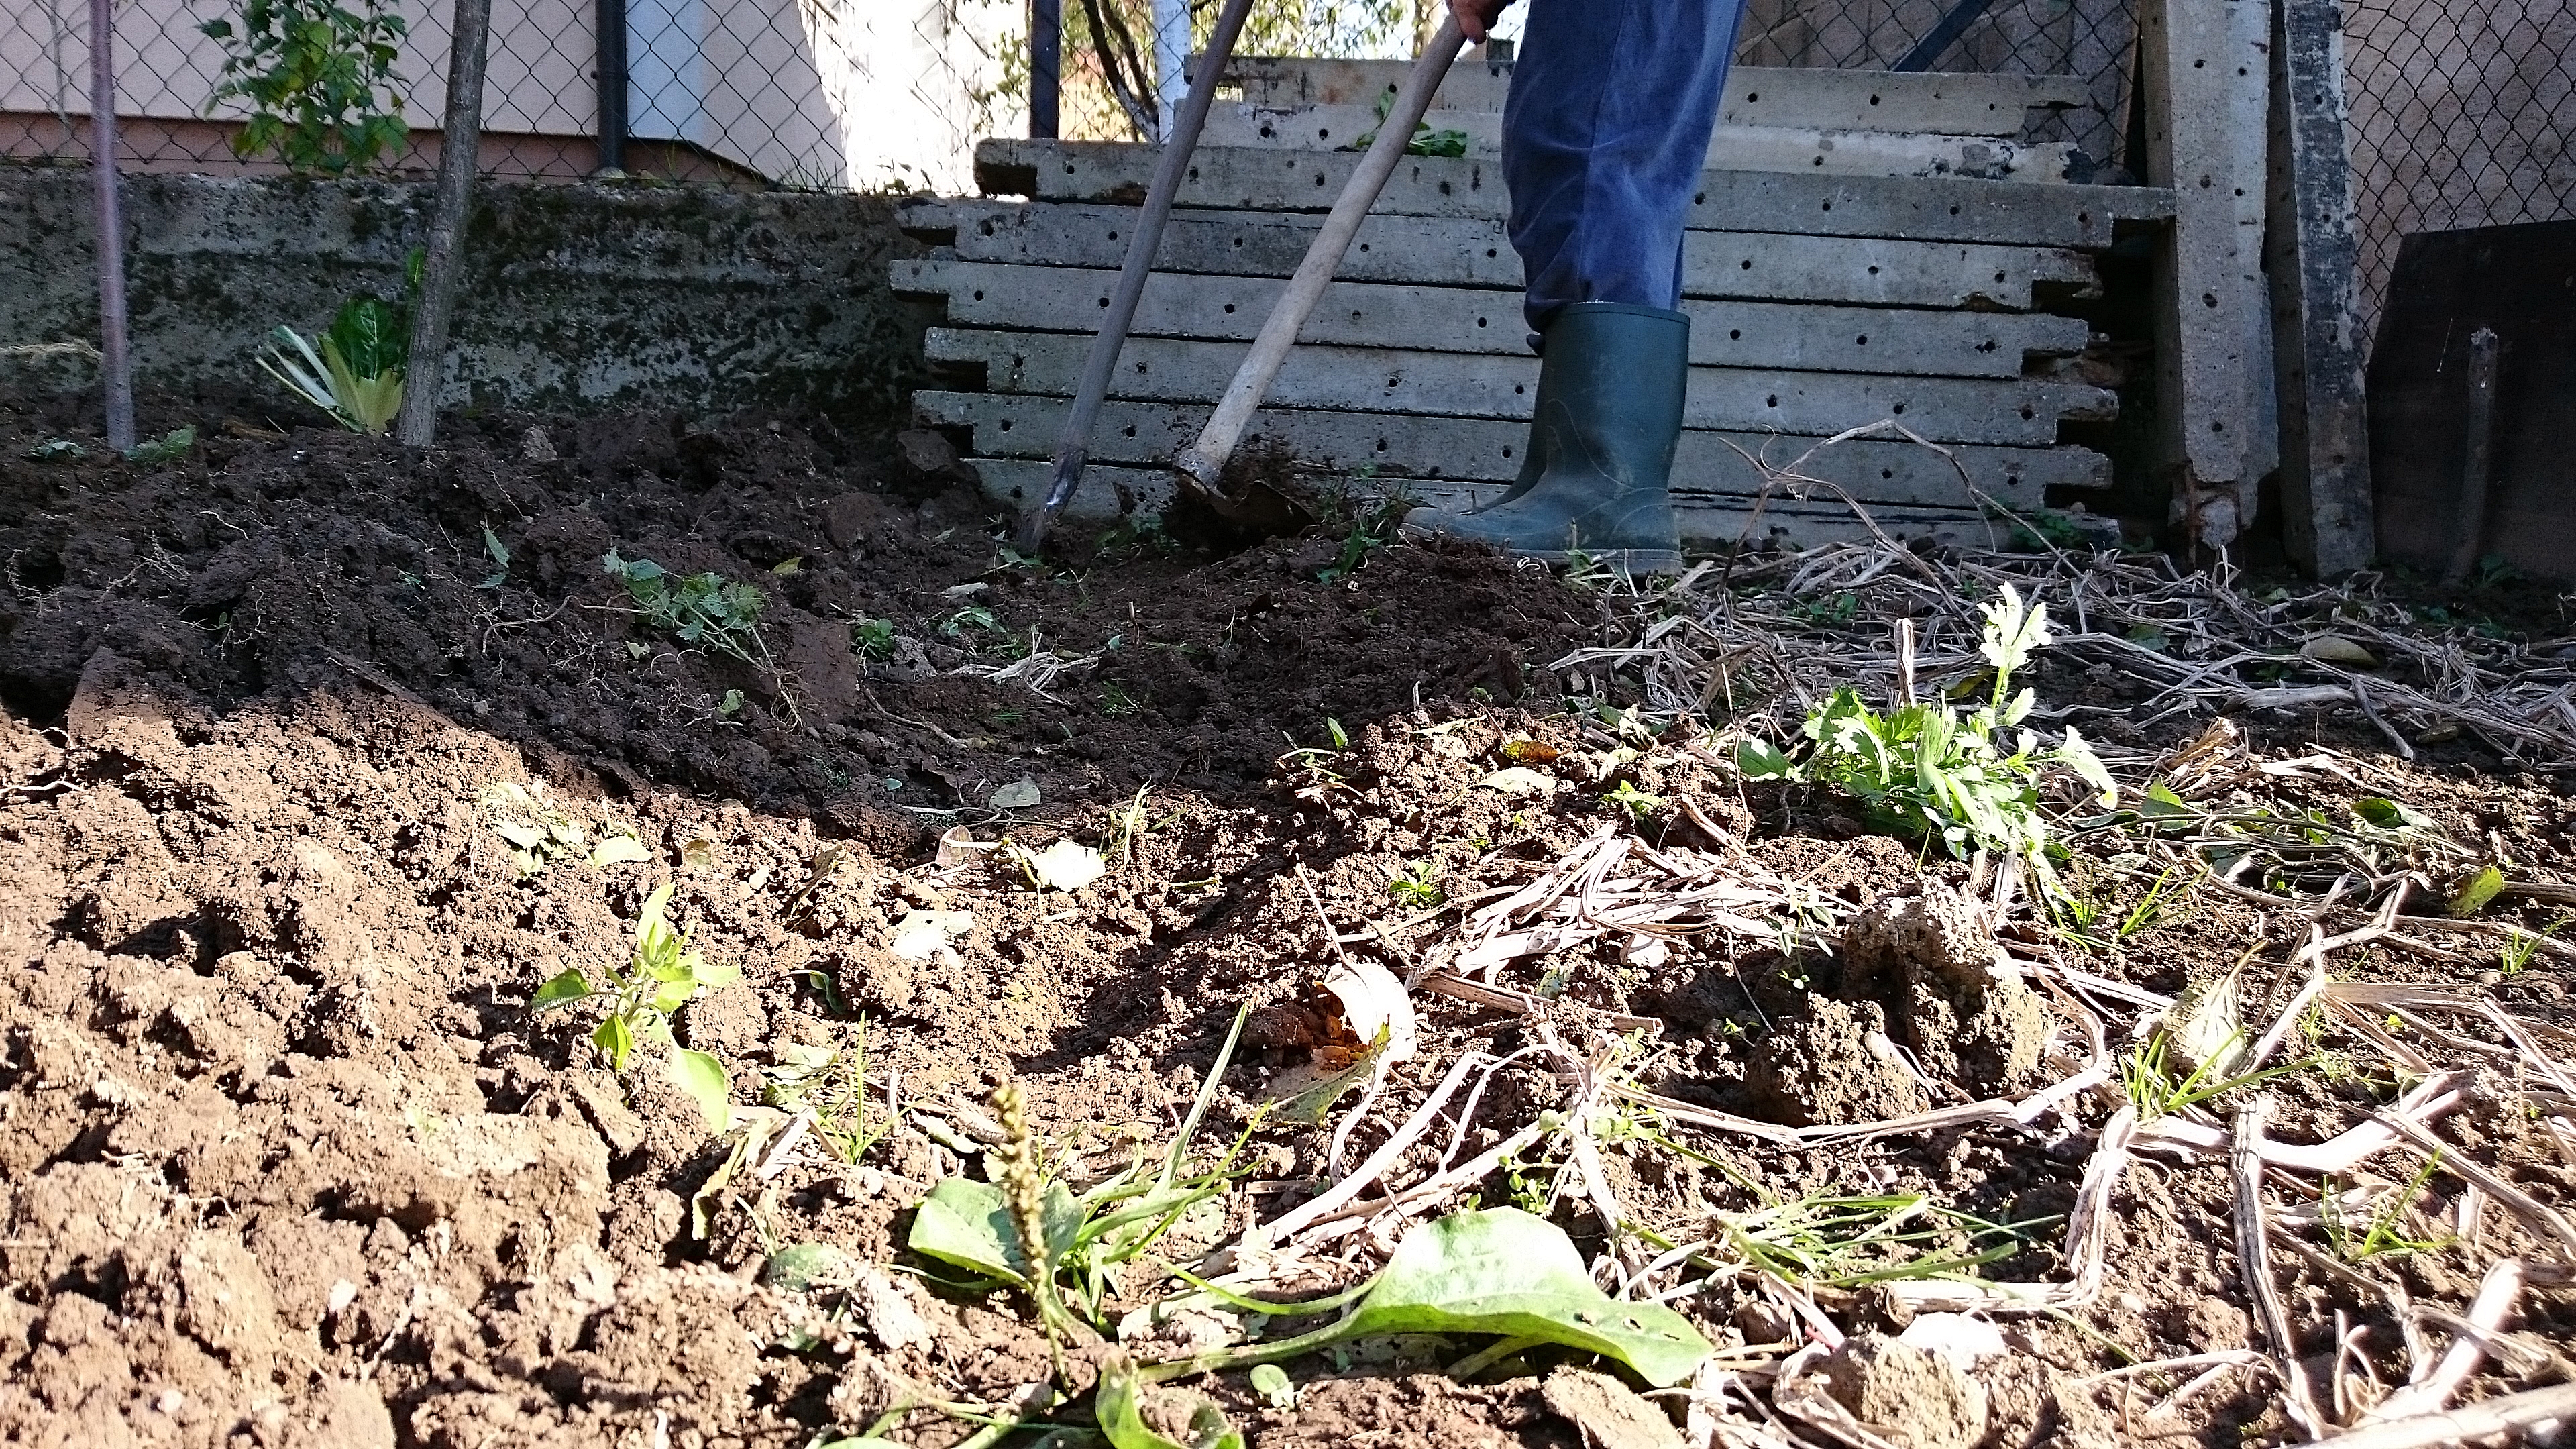 A person in rubber boots using a hoe in the garden to remove weeds